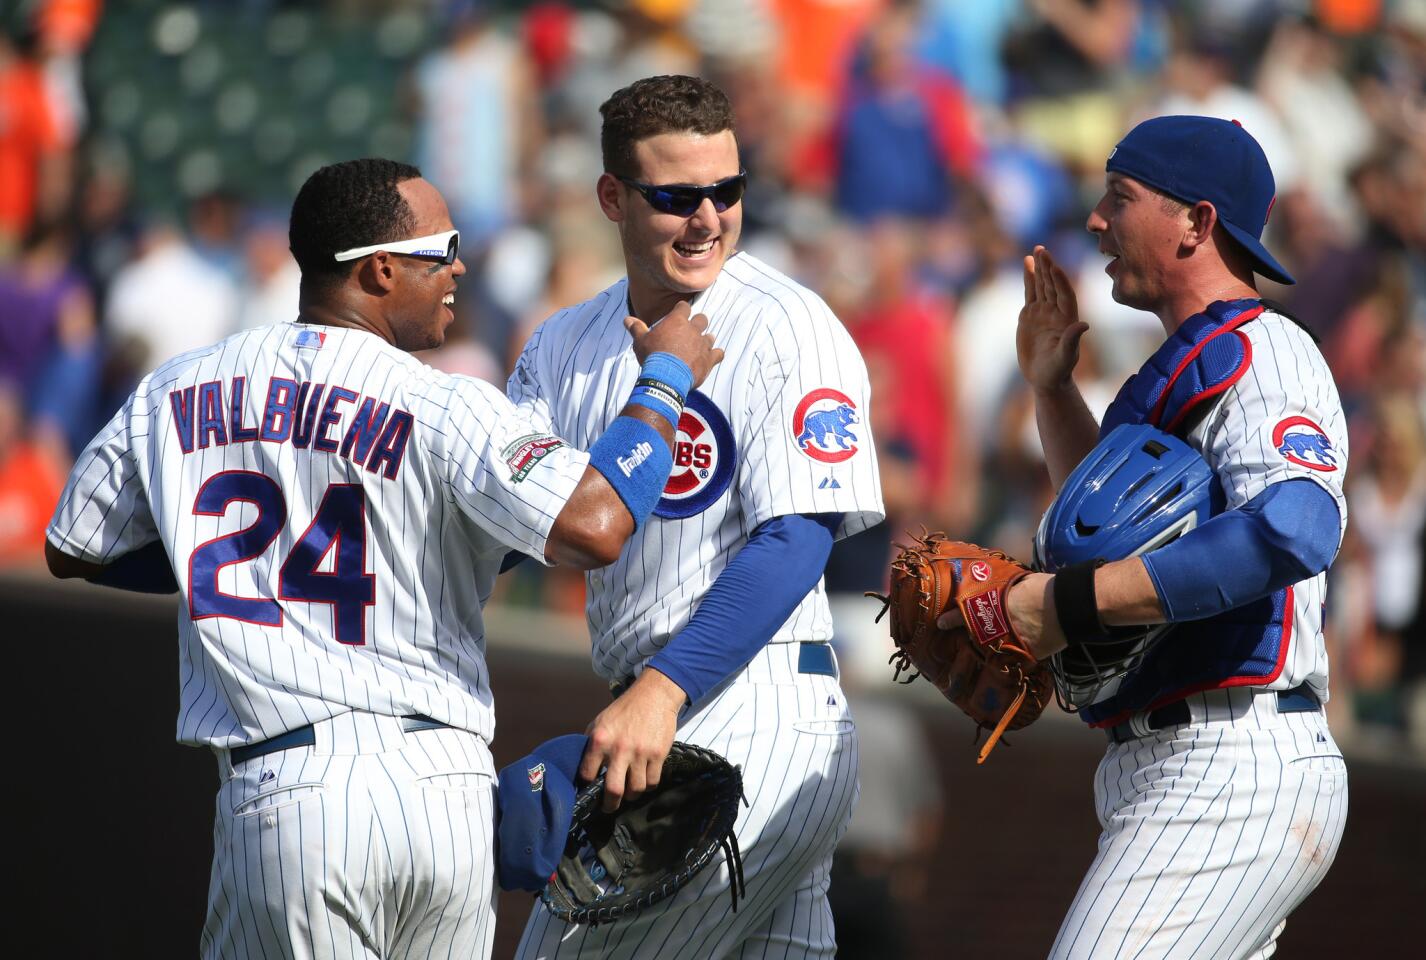 Luis Valbuena, Anthony Rizzo and John Baker celebrate the win.